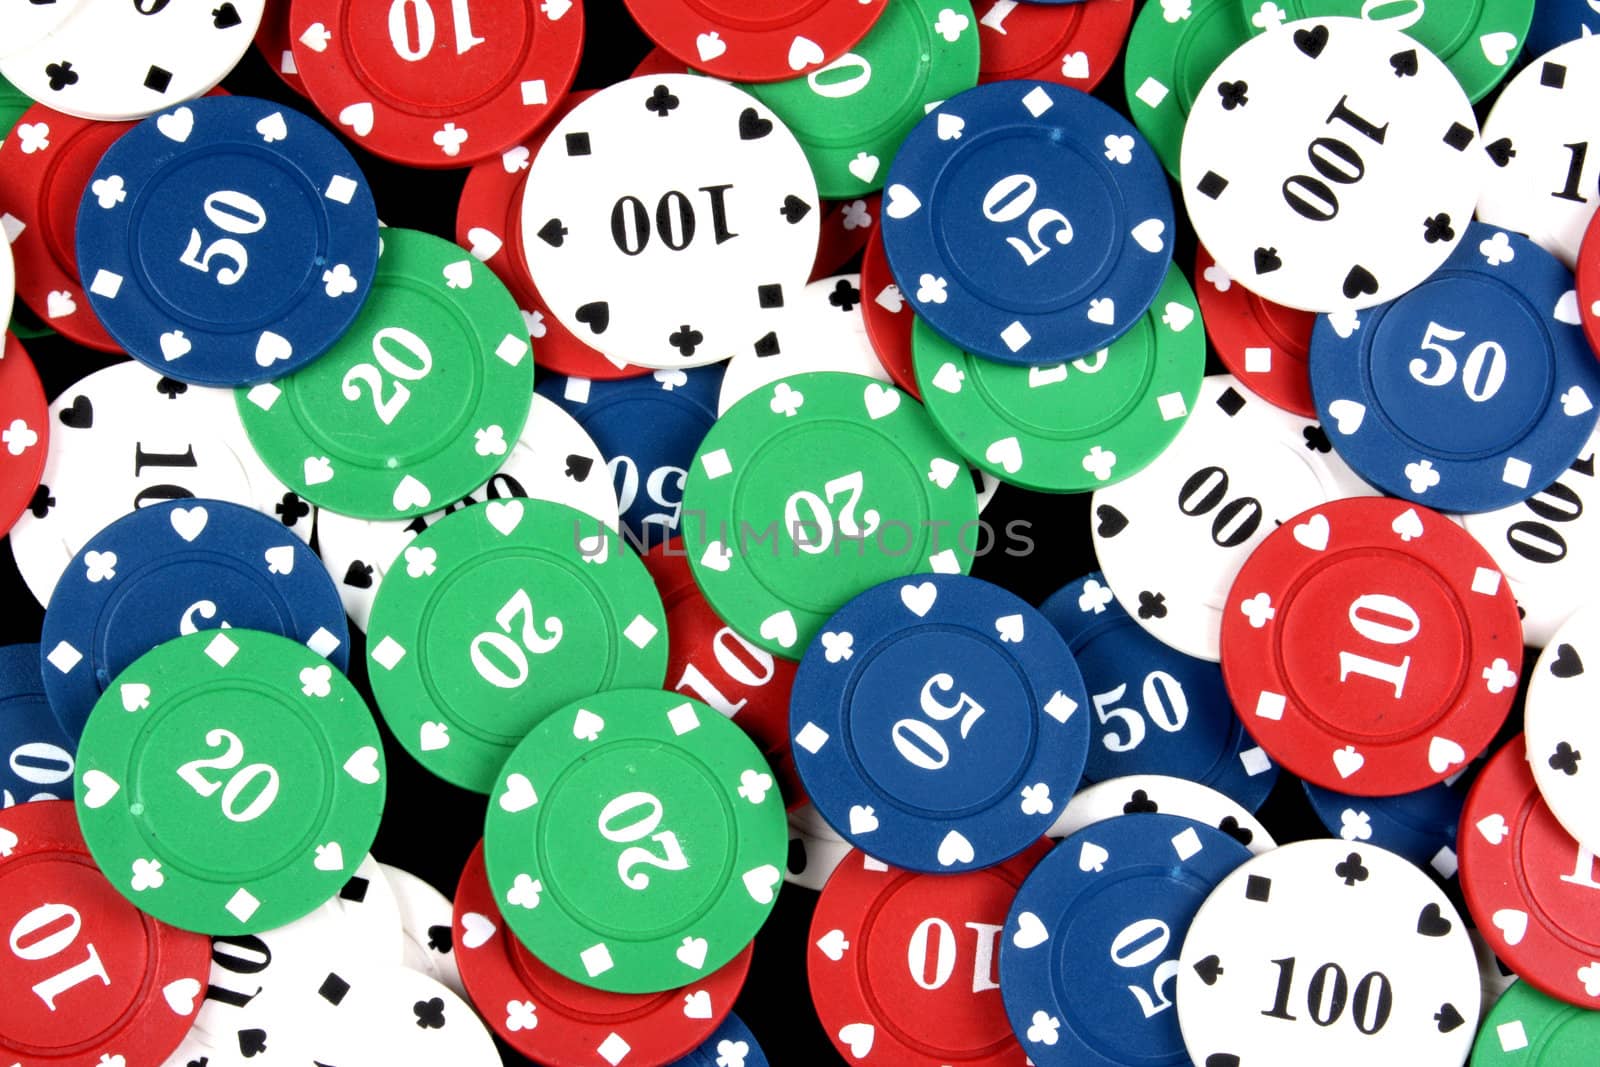 A set of colorful gambling chips.